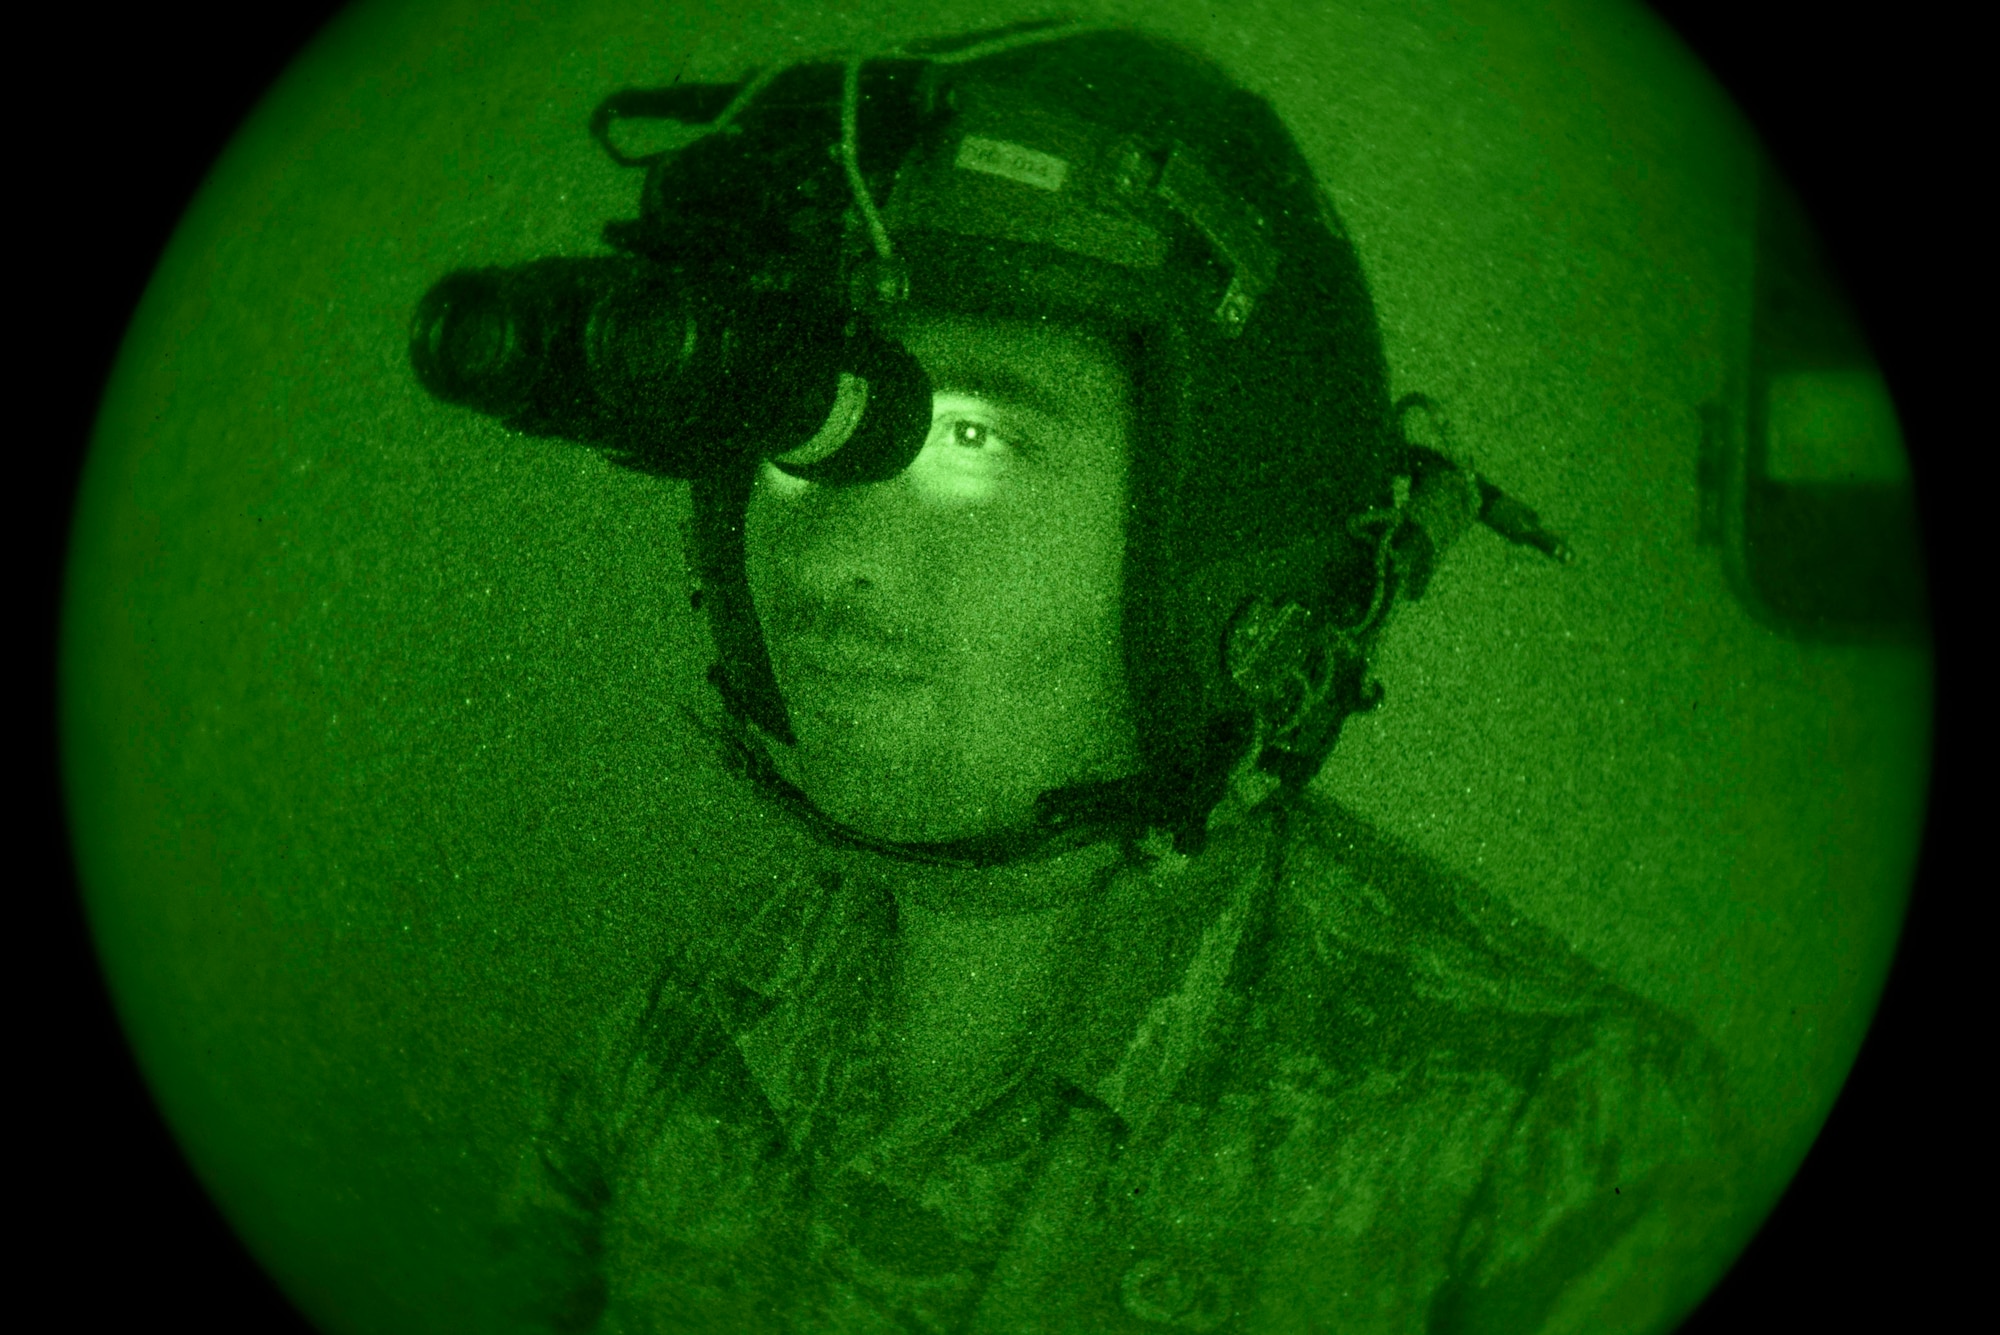 Airman Mark Rocha, 436th Operations Support Squadron aircrew flight equipment apprentice, performs a preflight inspection of night vision goggles May 23, 2018, at Dover Air Force Base, Del. AFE technicians perform routine inspections, repair and test NVGs and other flight equipment. (U.S Air Force photo by Airman 1st Class Zoe M. Wockenfuss)